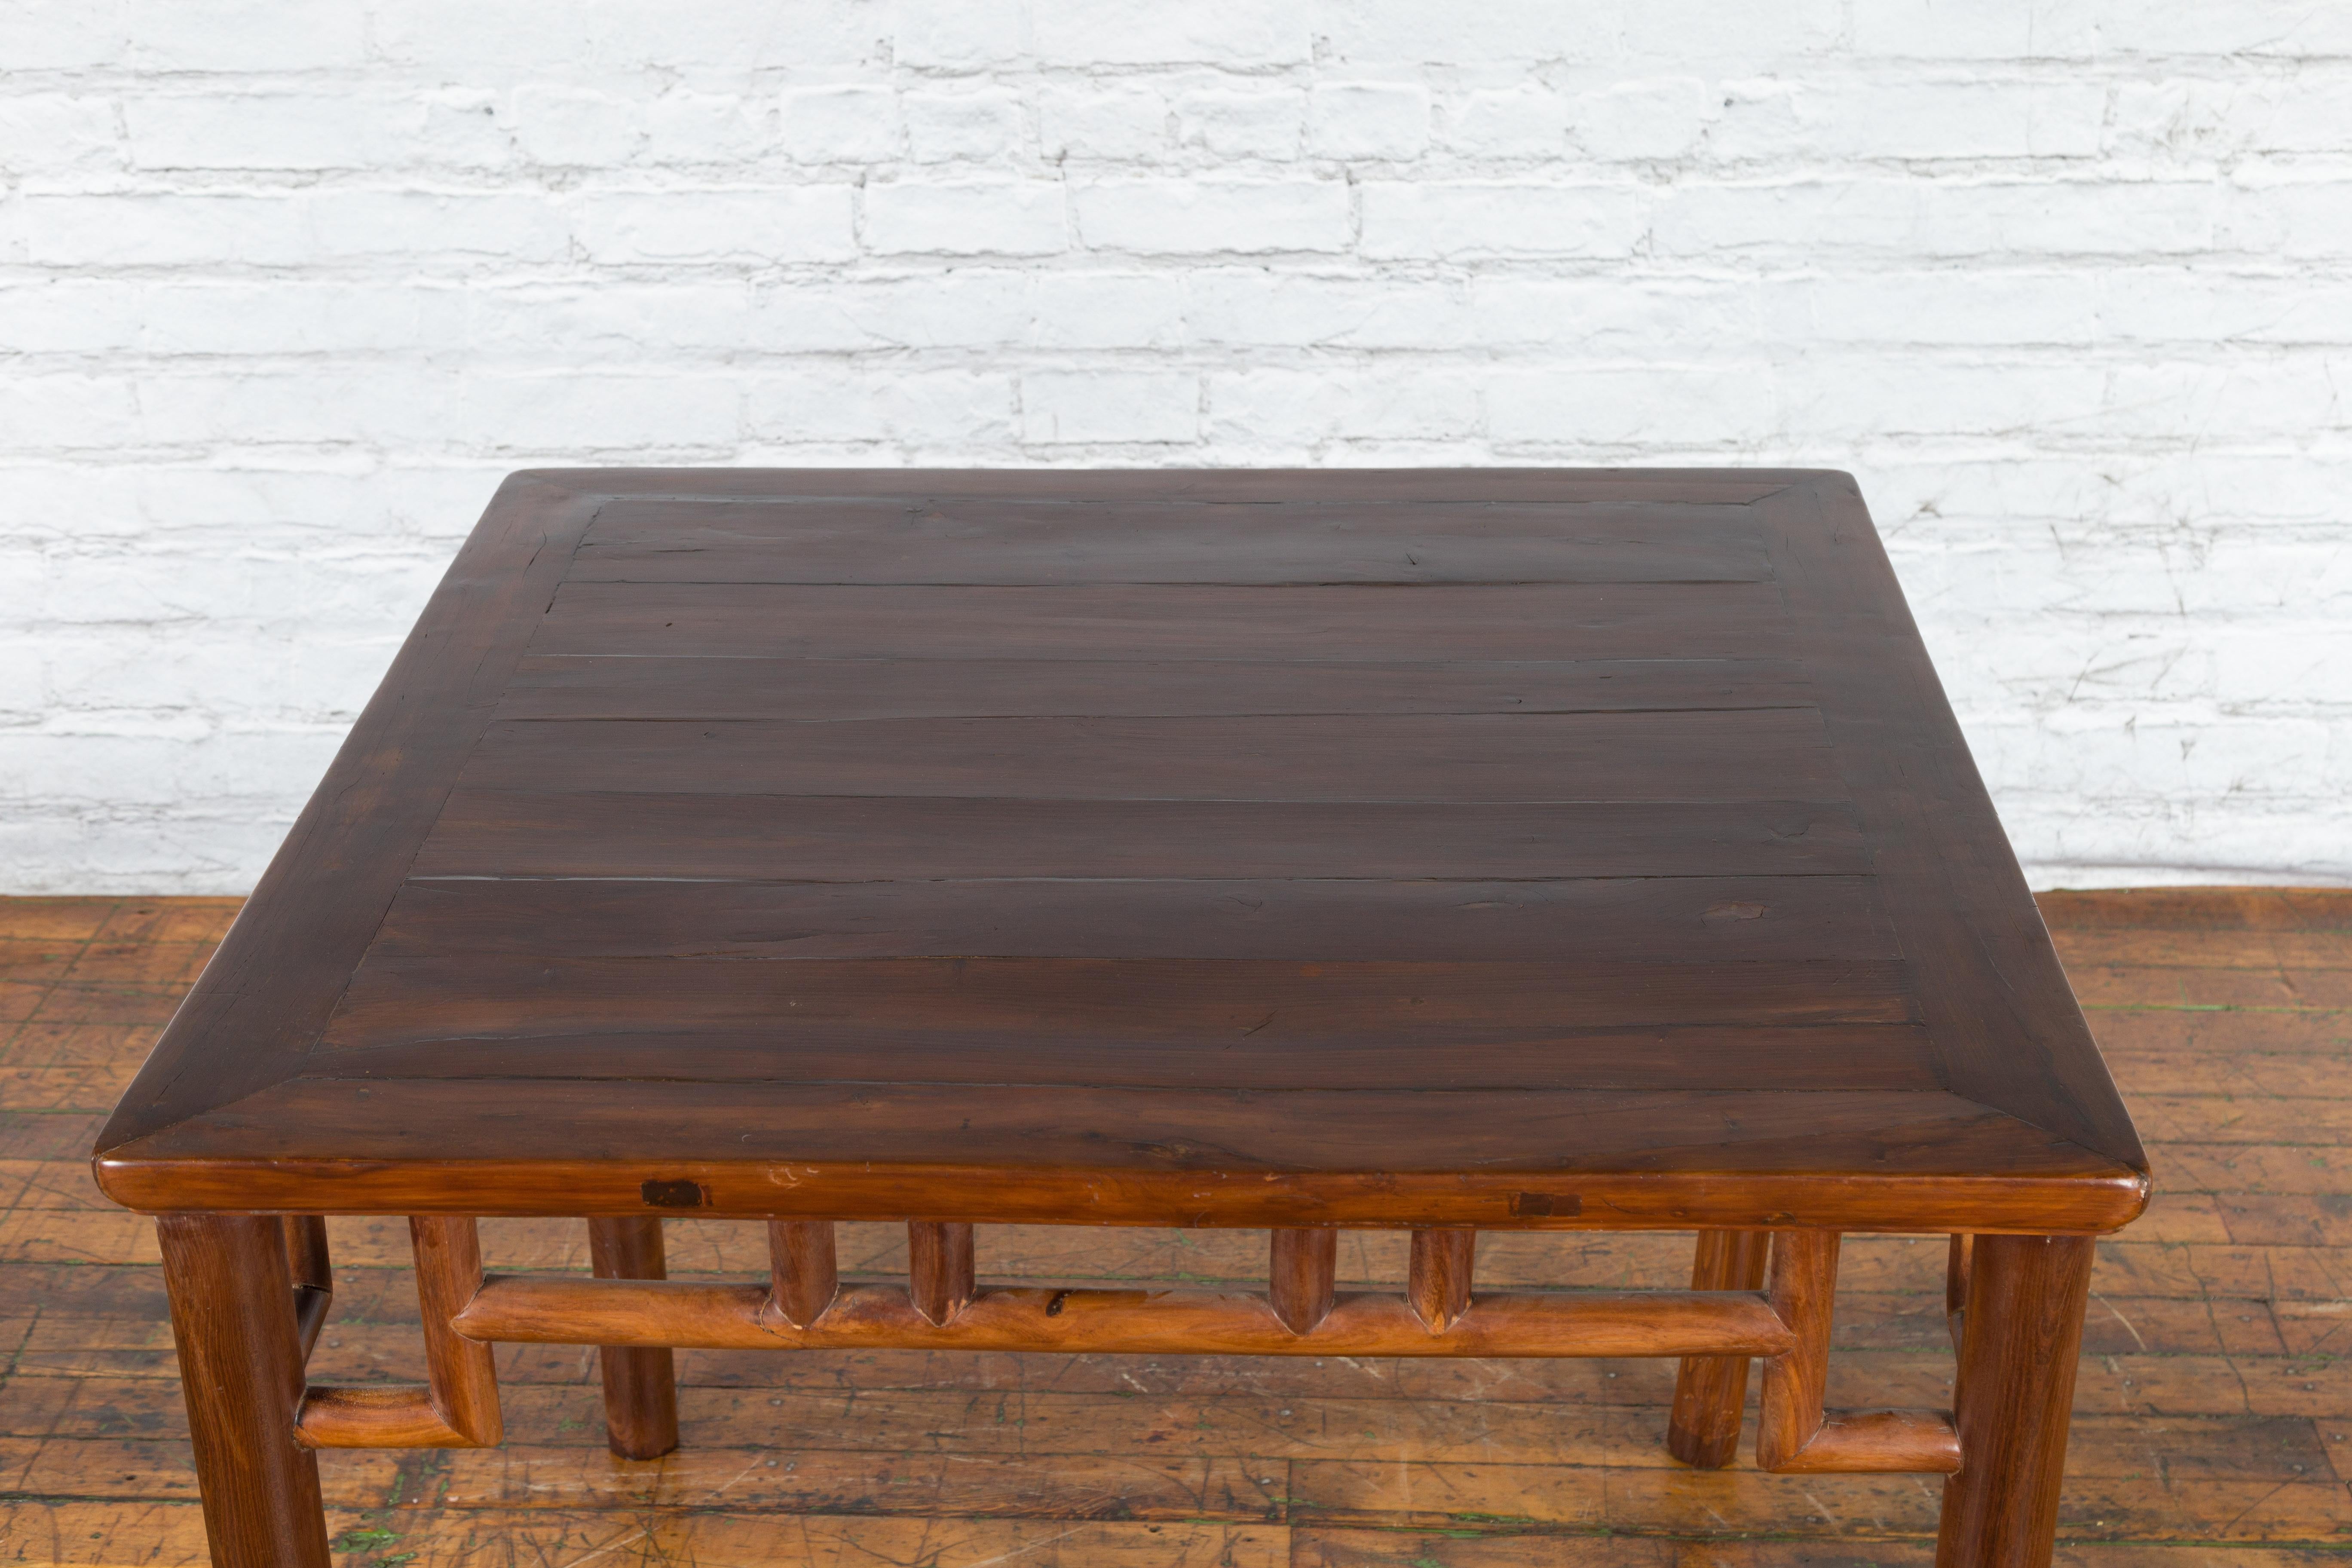 Chinese Qing Dynasty Period 19th Century Game Table with Humpback Stretchers For Sale 6